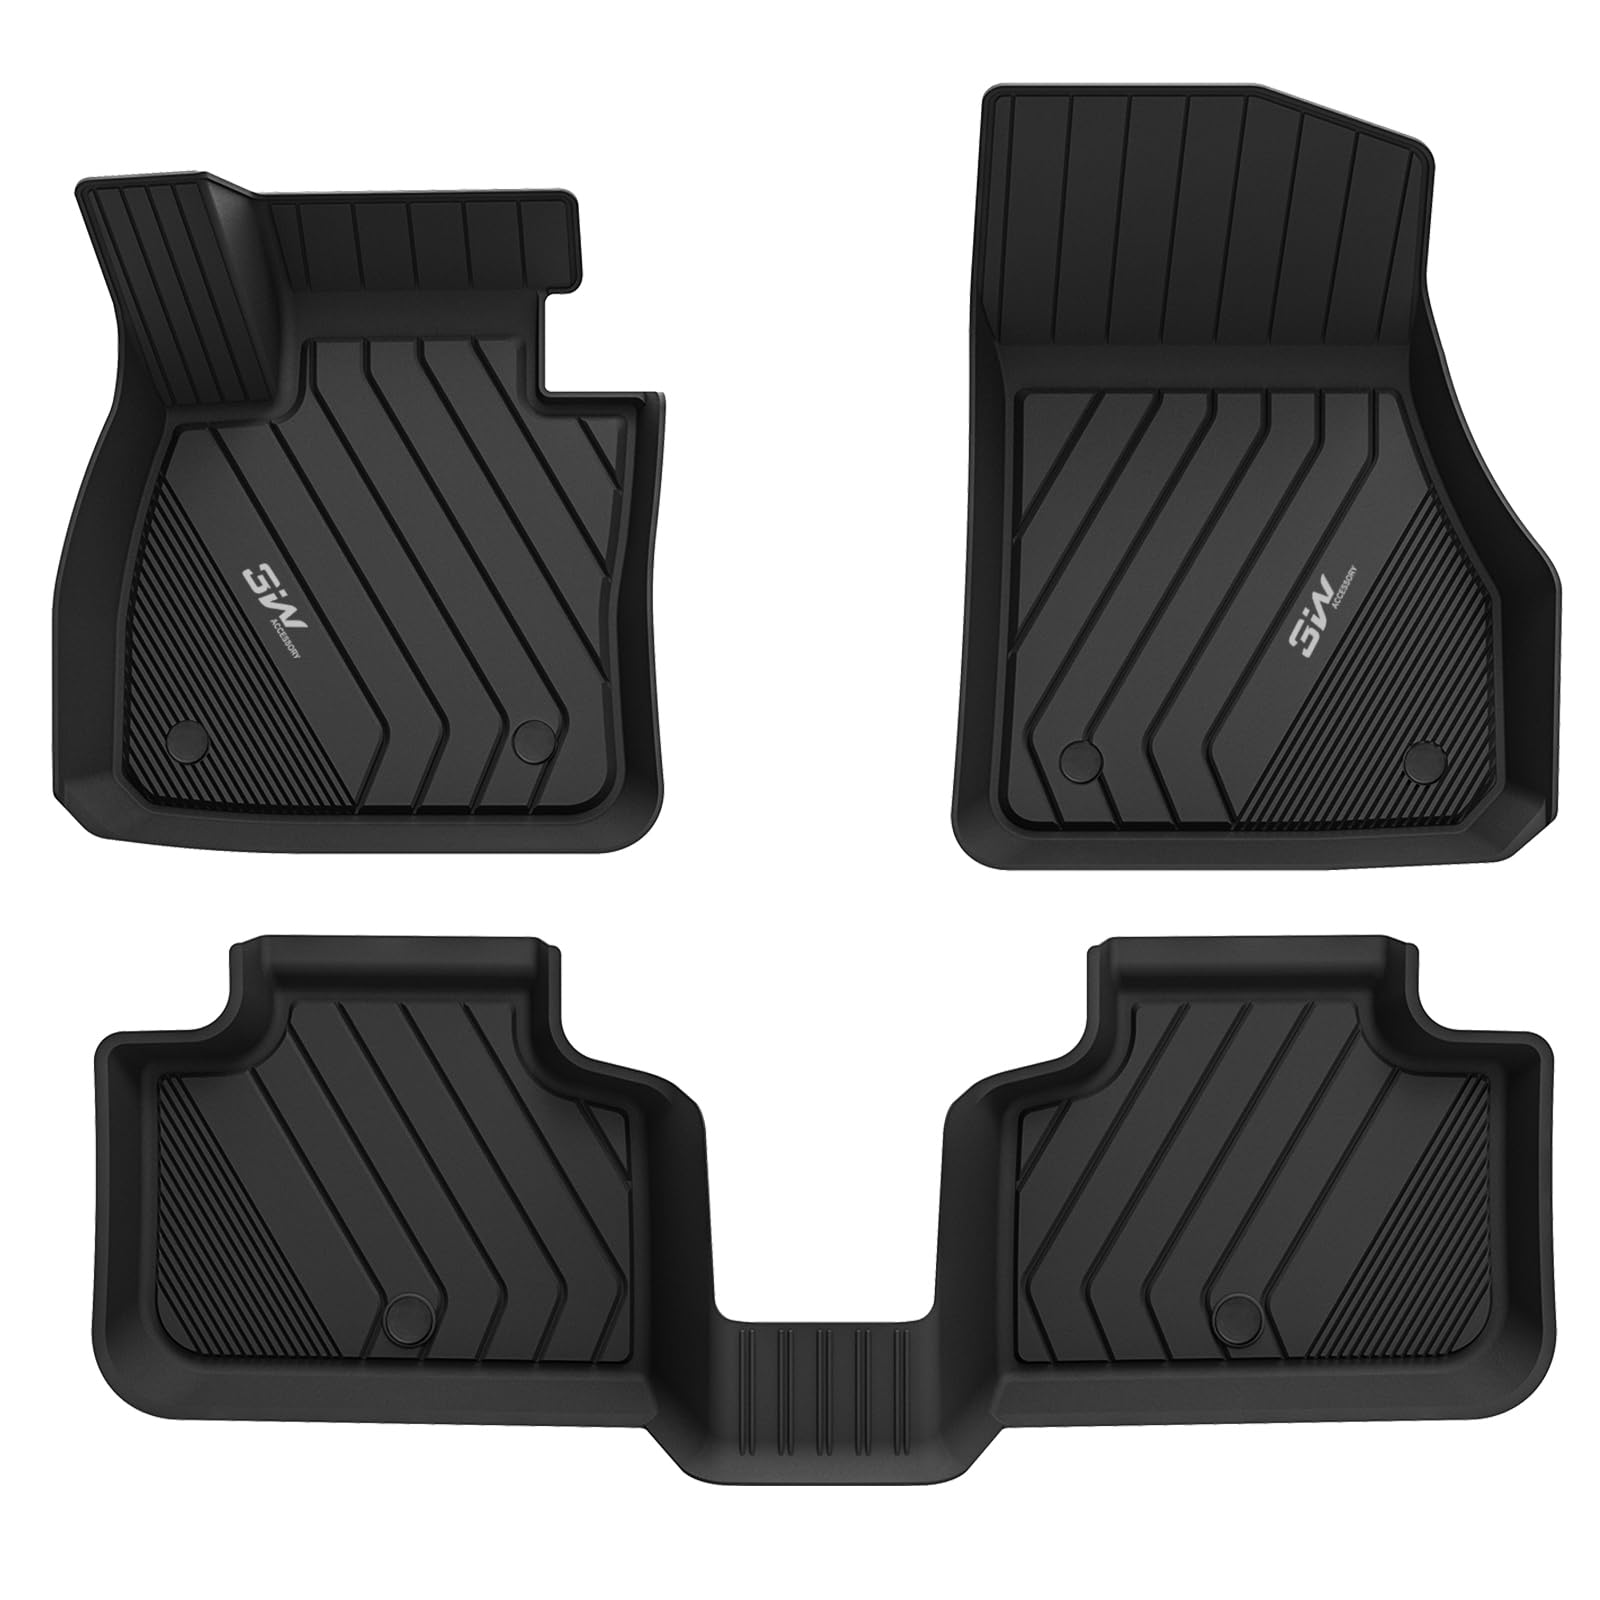 3W BMW X2 2018-2023 Custom Floor Mats TPE Material & All-Weather Protection Vehicles & Parts 3Wliners 2018-2023 X2 2018-2023 1st&2nd Row Mats